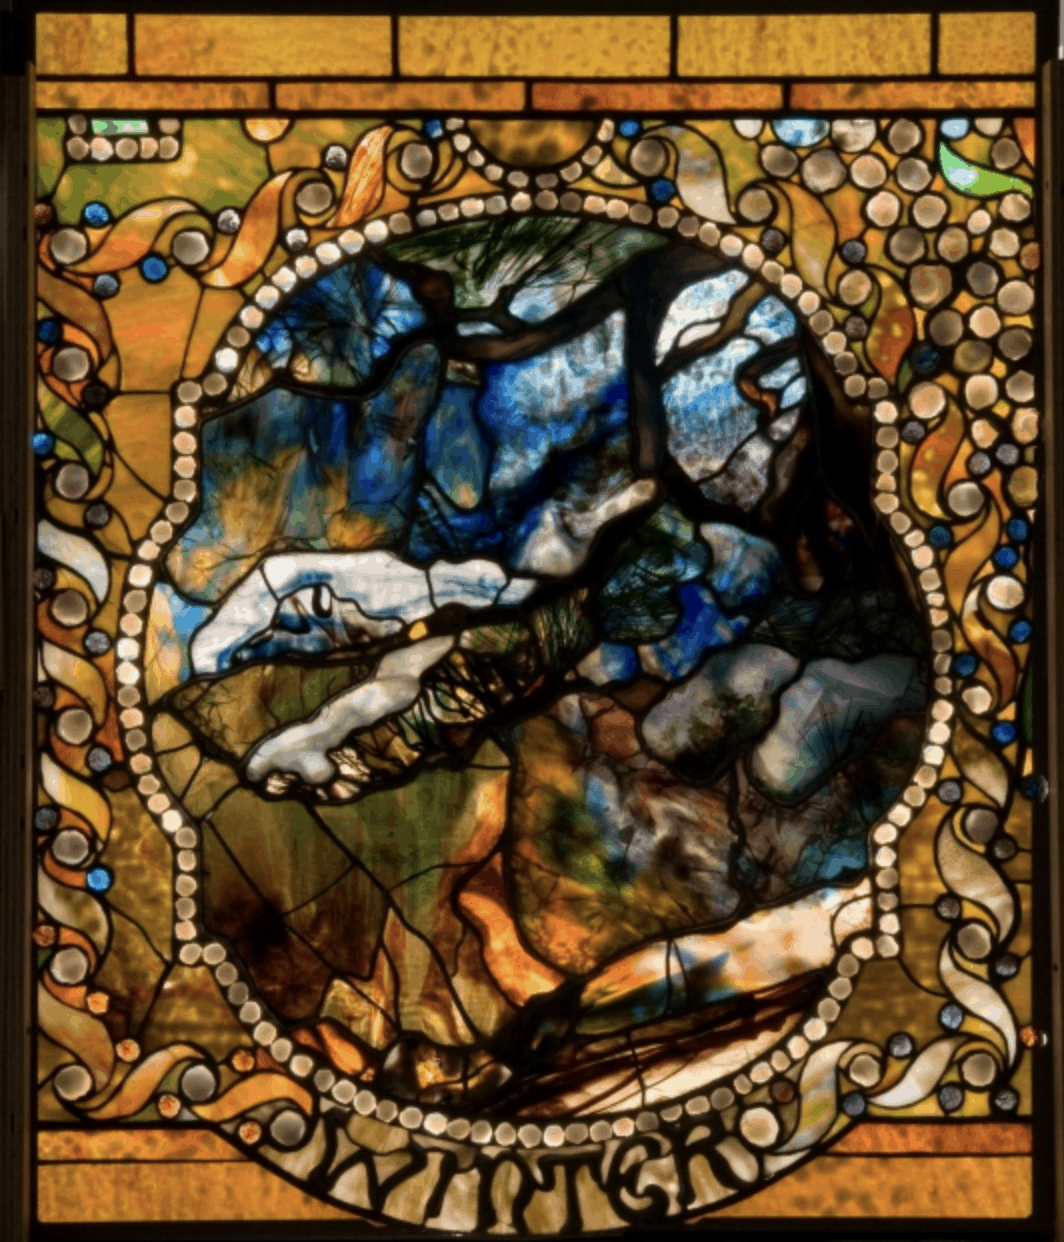 Tiffany glass is the core of the art of Louis Comfort Tiffany